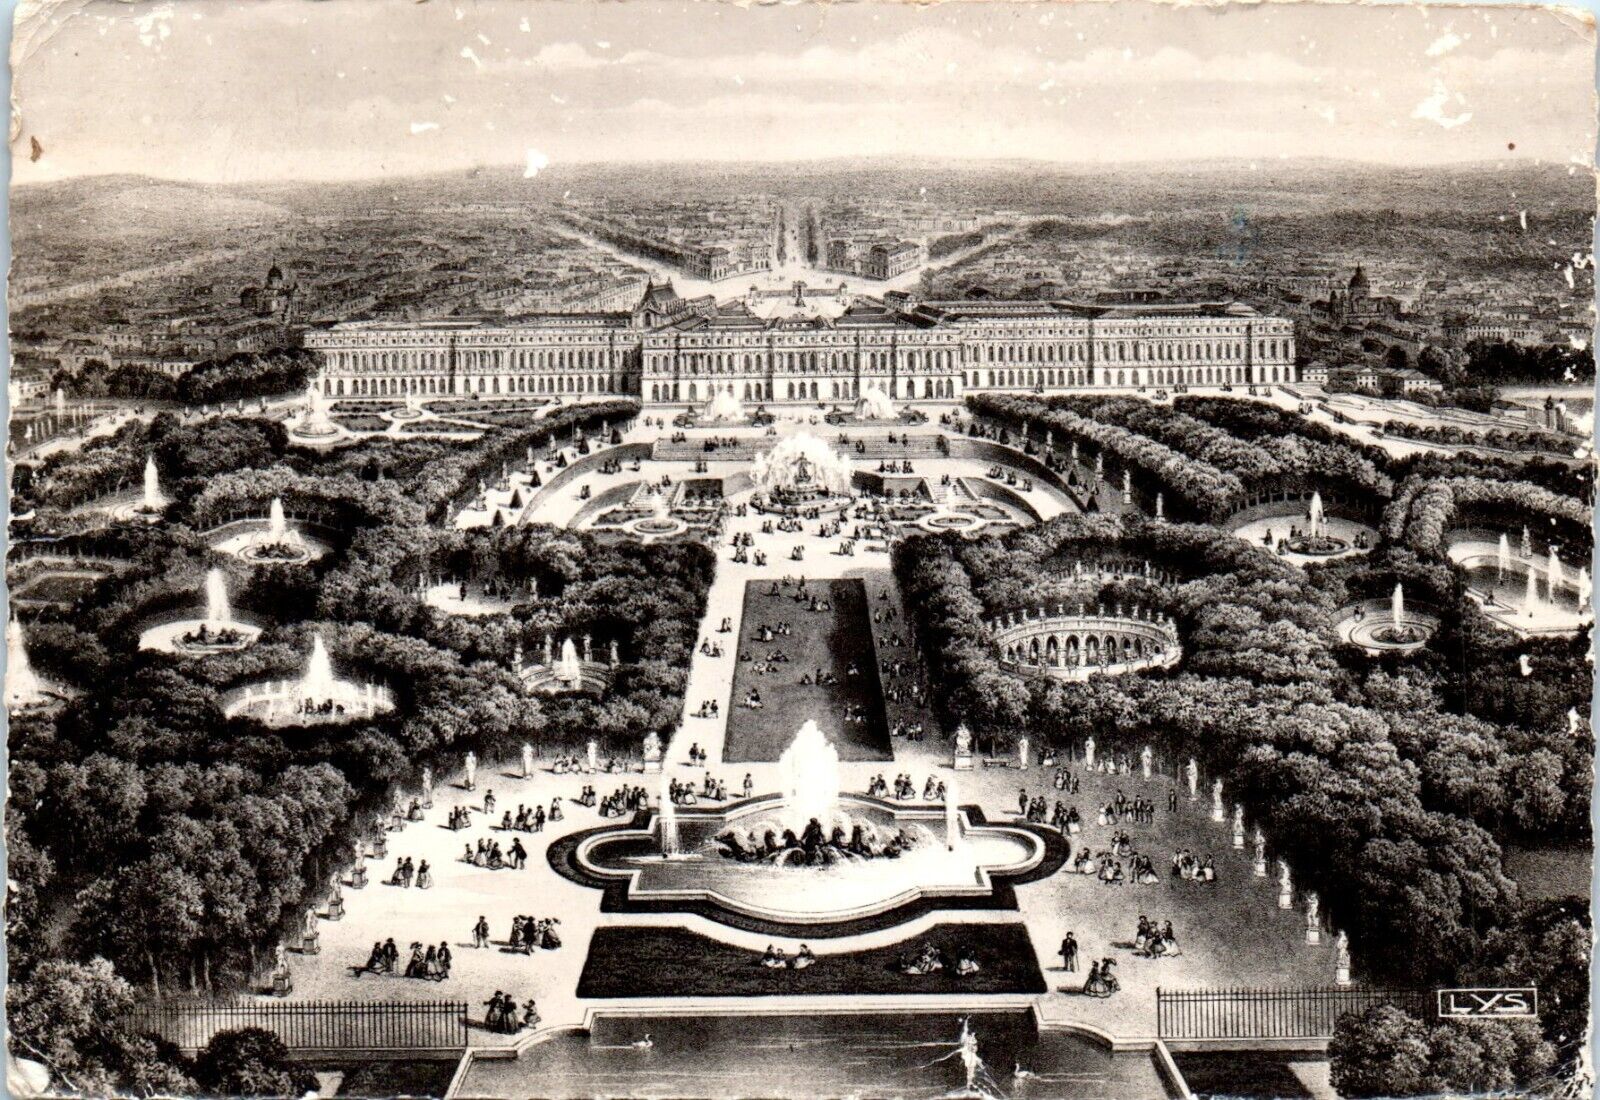 Aerial View of the Palace of Versailles, Versailles, France RPPC Postcard